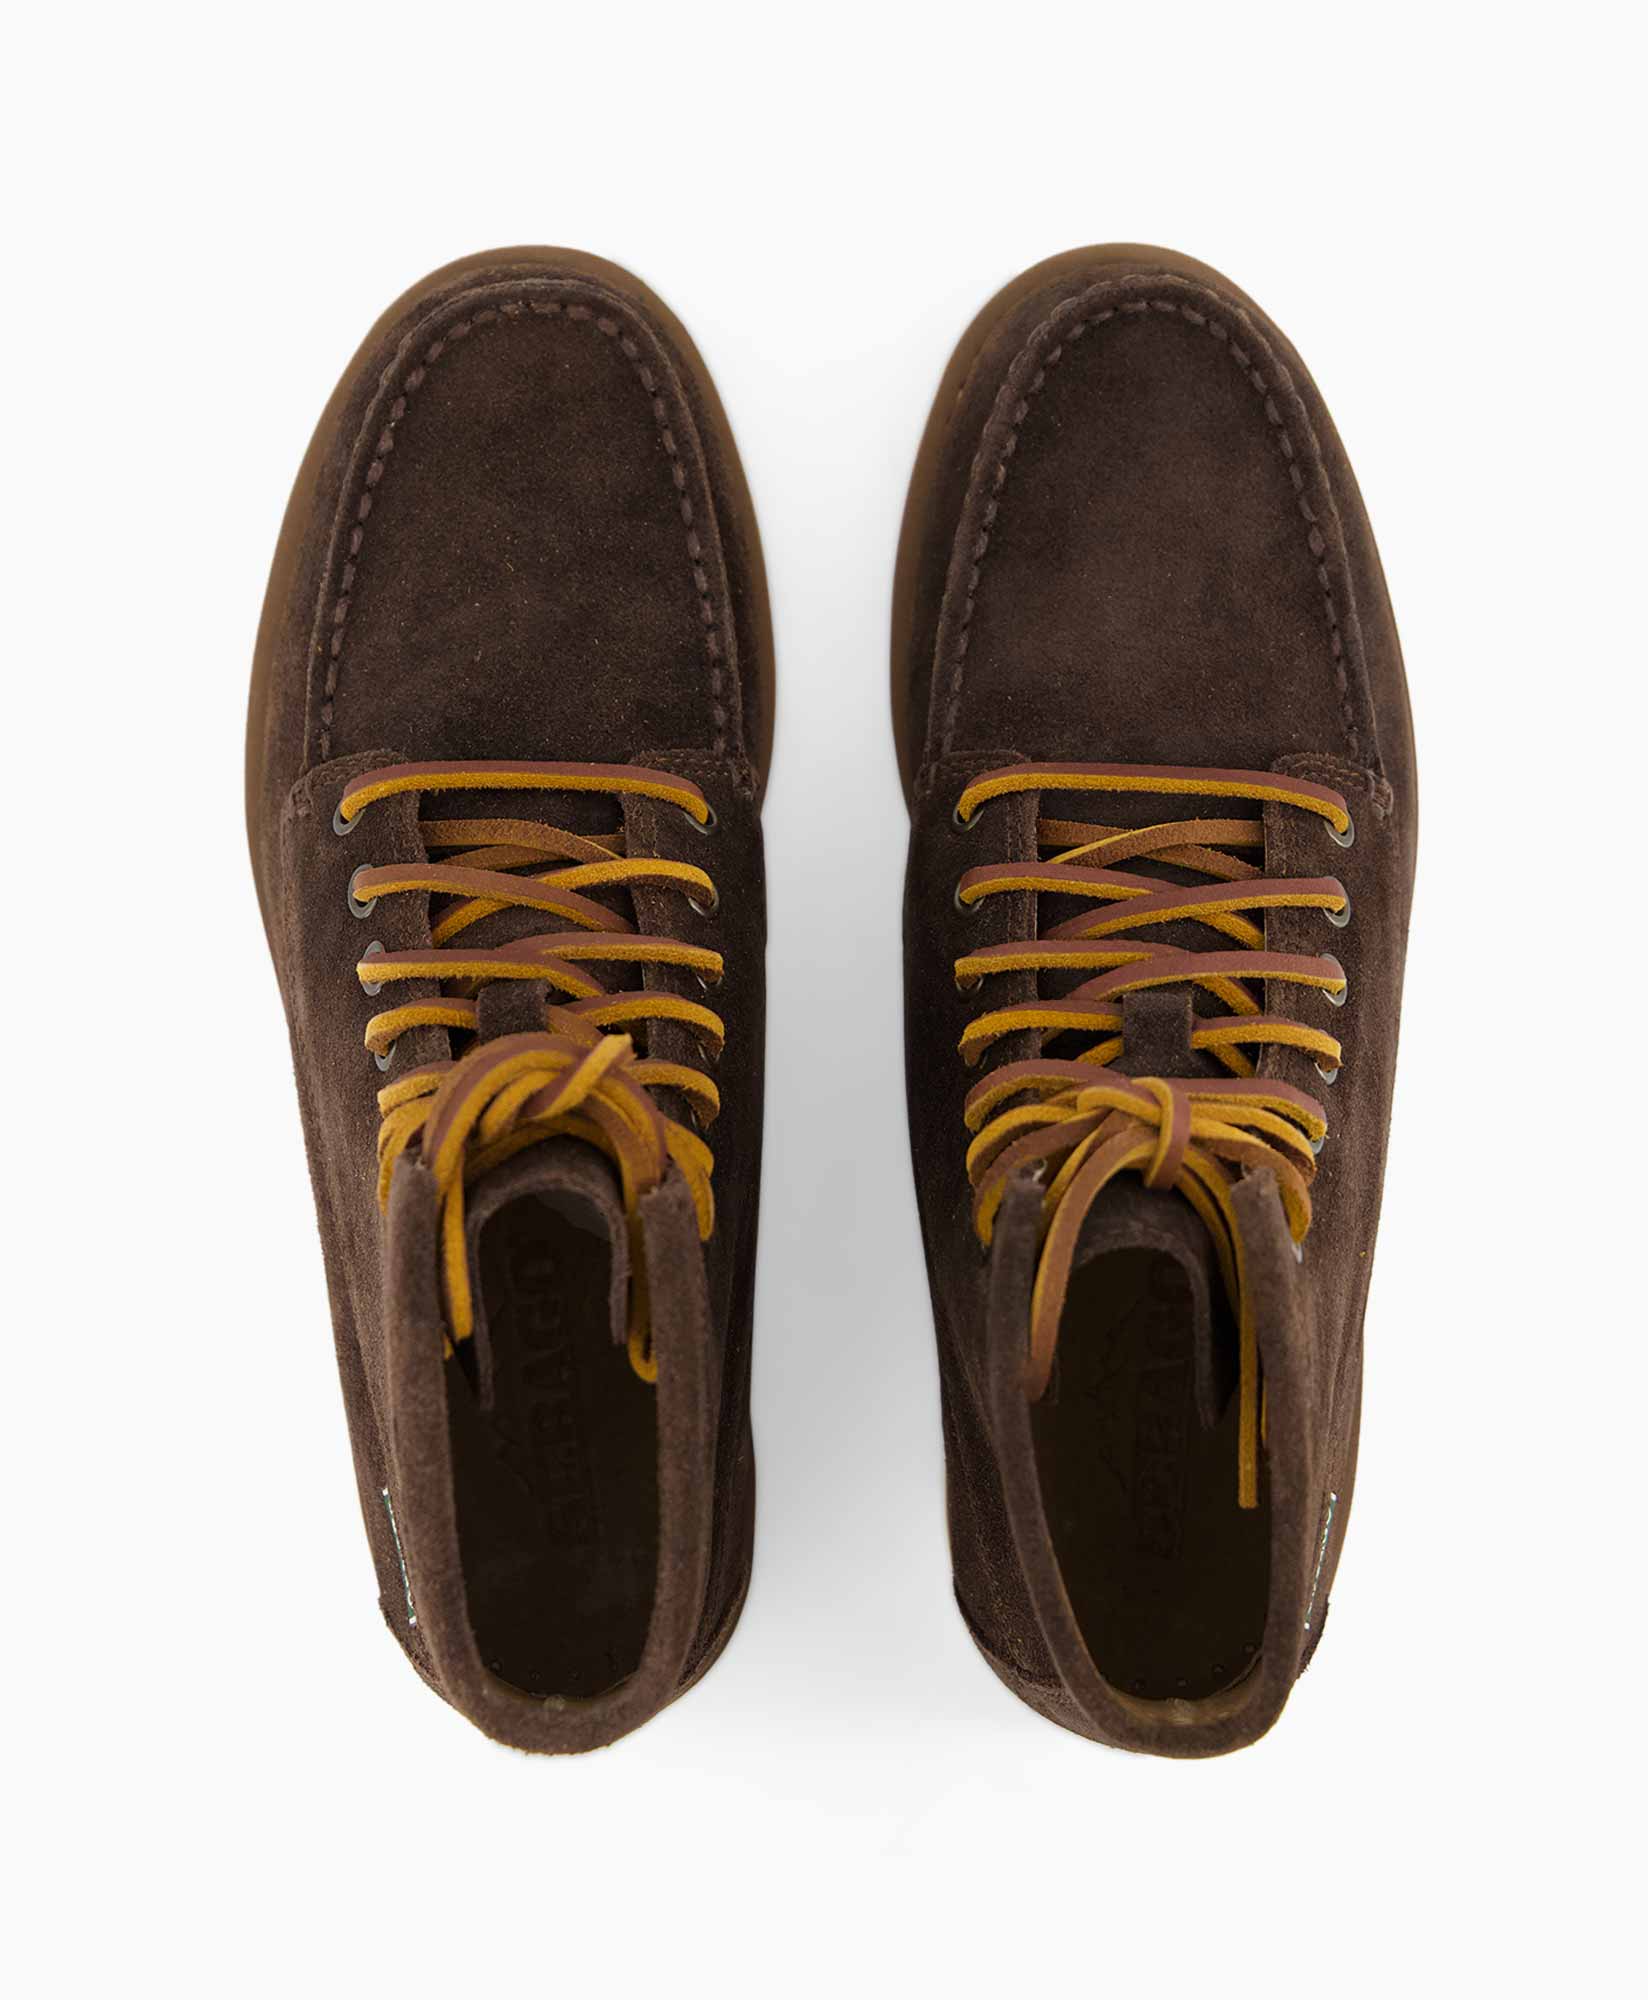 Veterboot Tala High Oiled Suede Donker Bruin